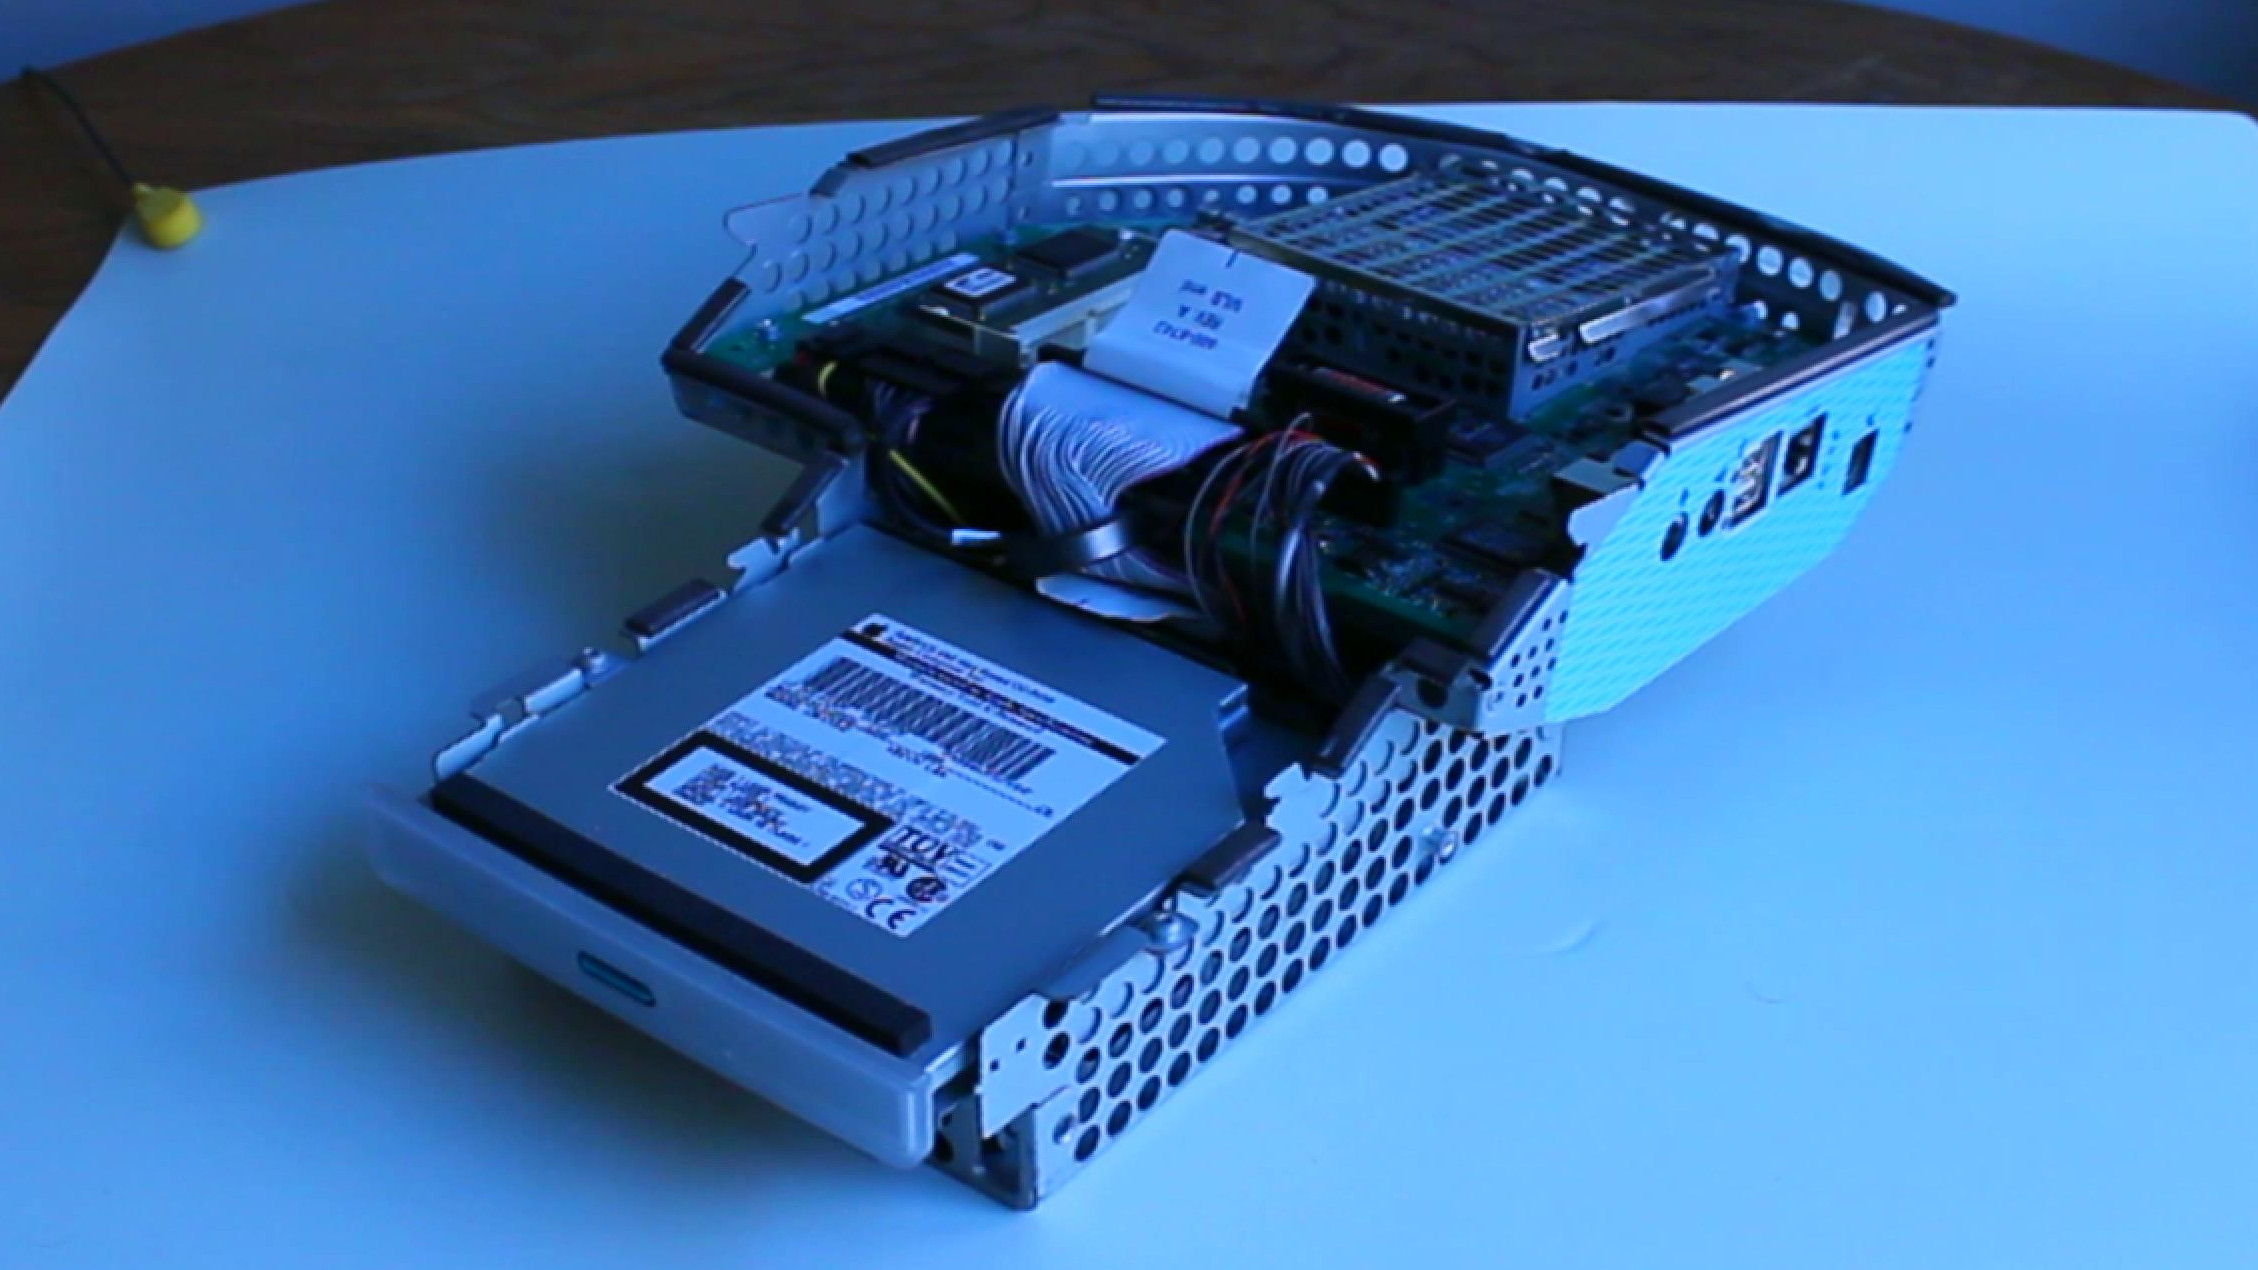 The internal chassis of an iMac G3 separated from its screen and case: mostly a CD drive, a circuit board, and a bundle of cables connecting the two